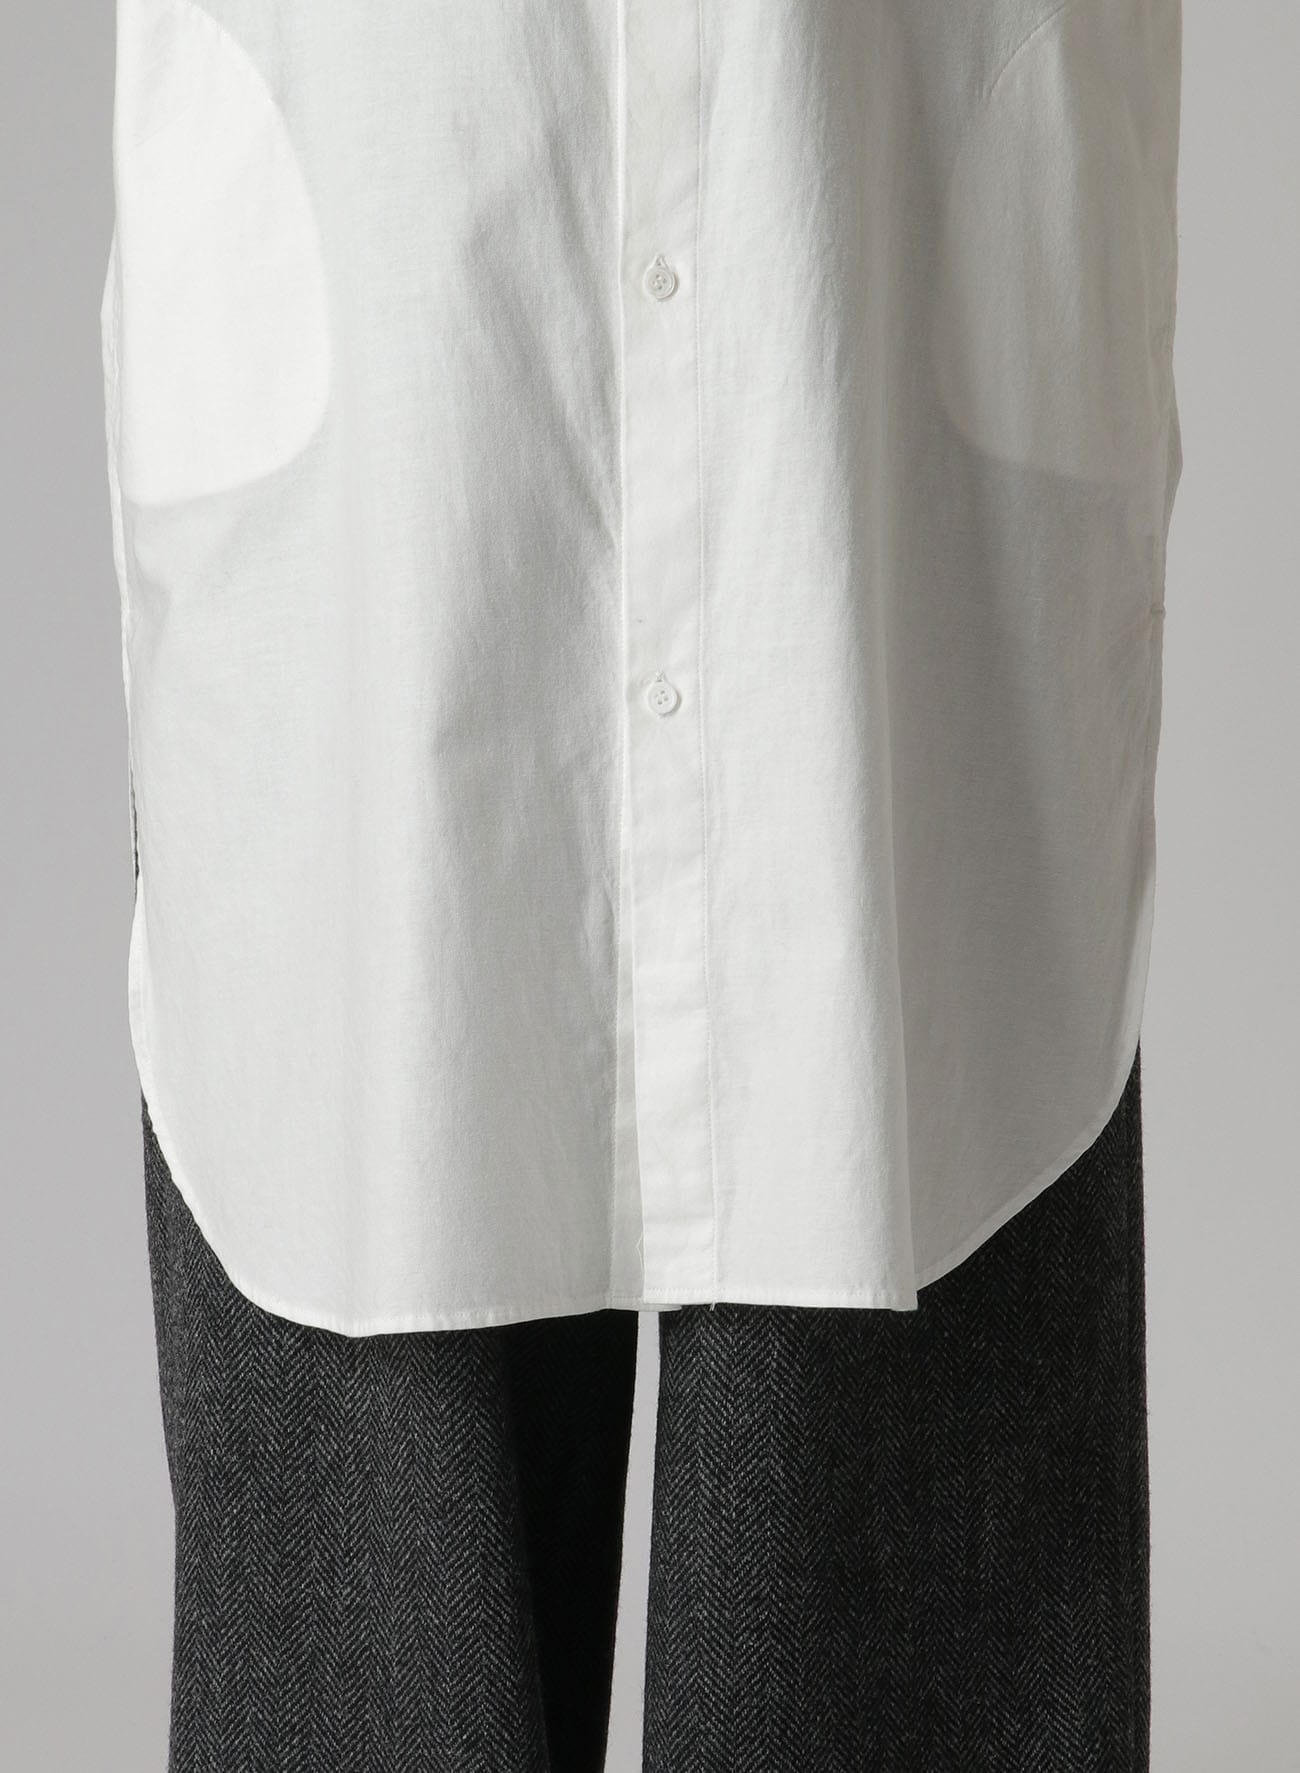 [Y's BORN PRODUCT]COTTON THIN TWILL OUTER SHIRT DRESS